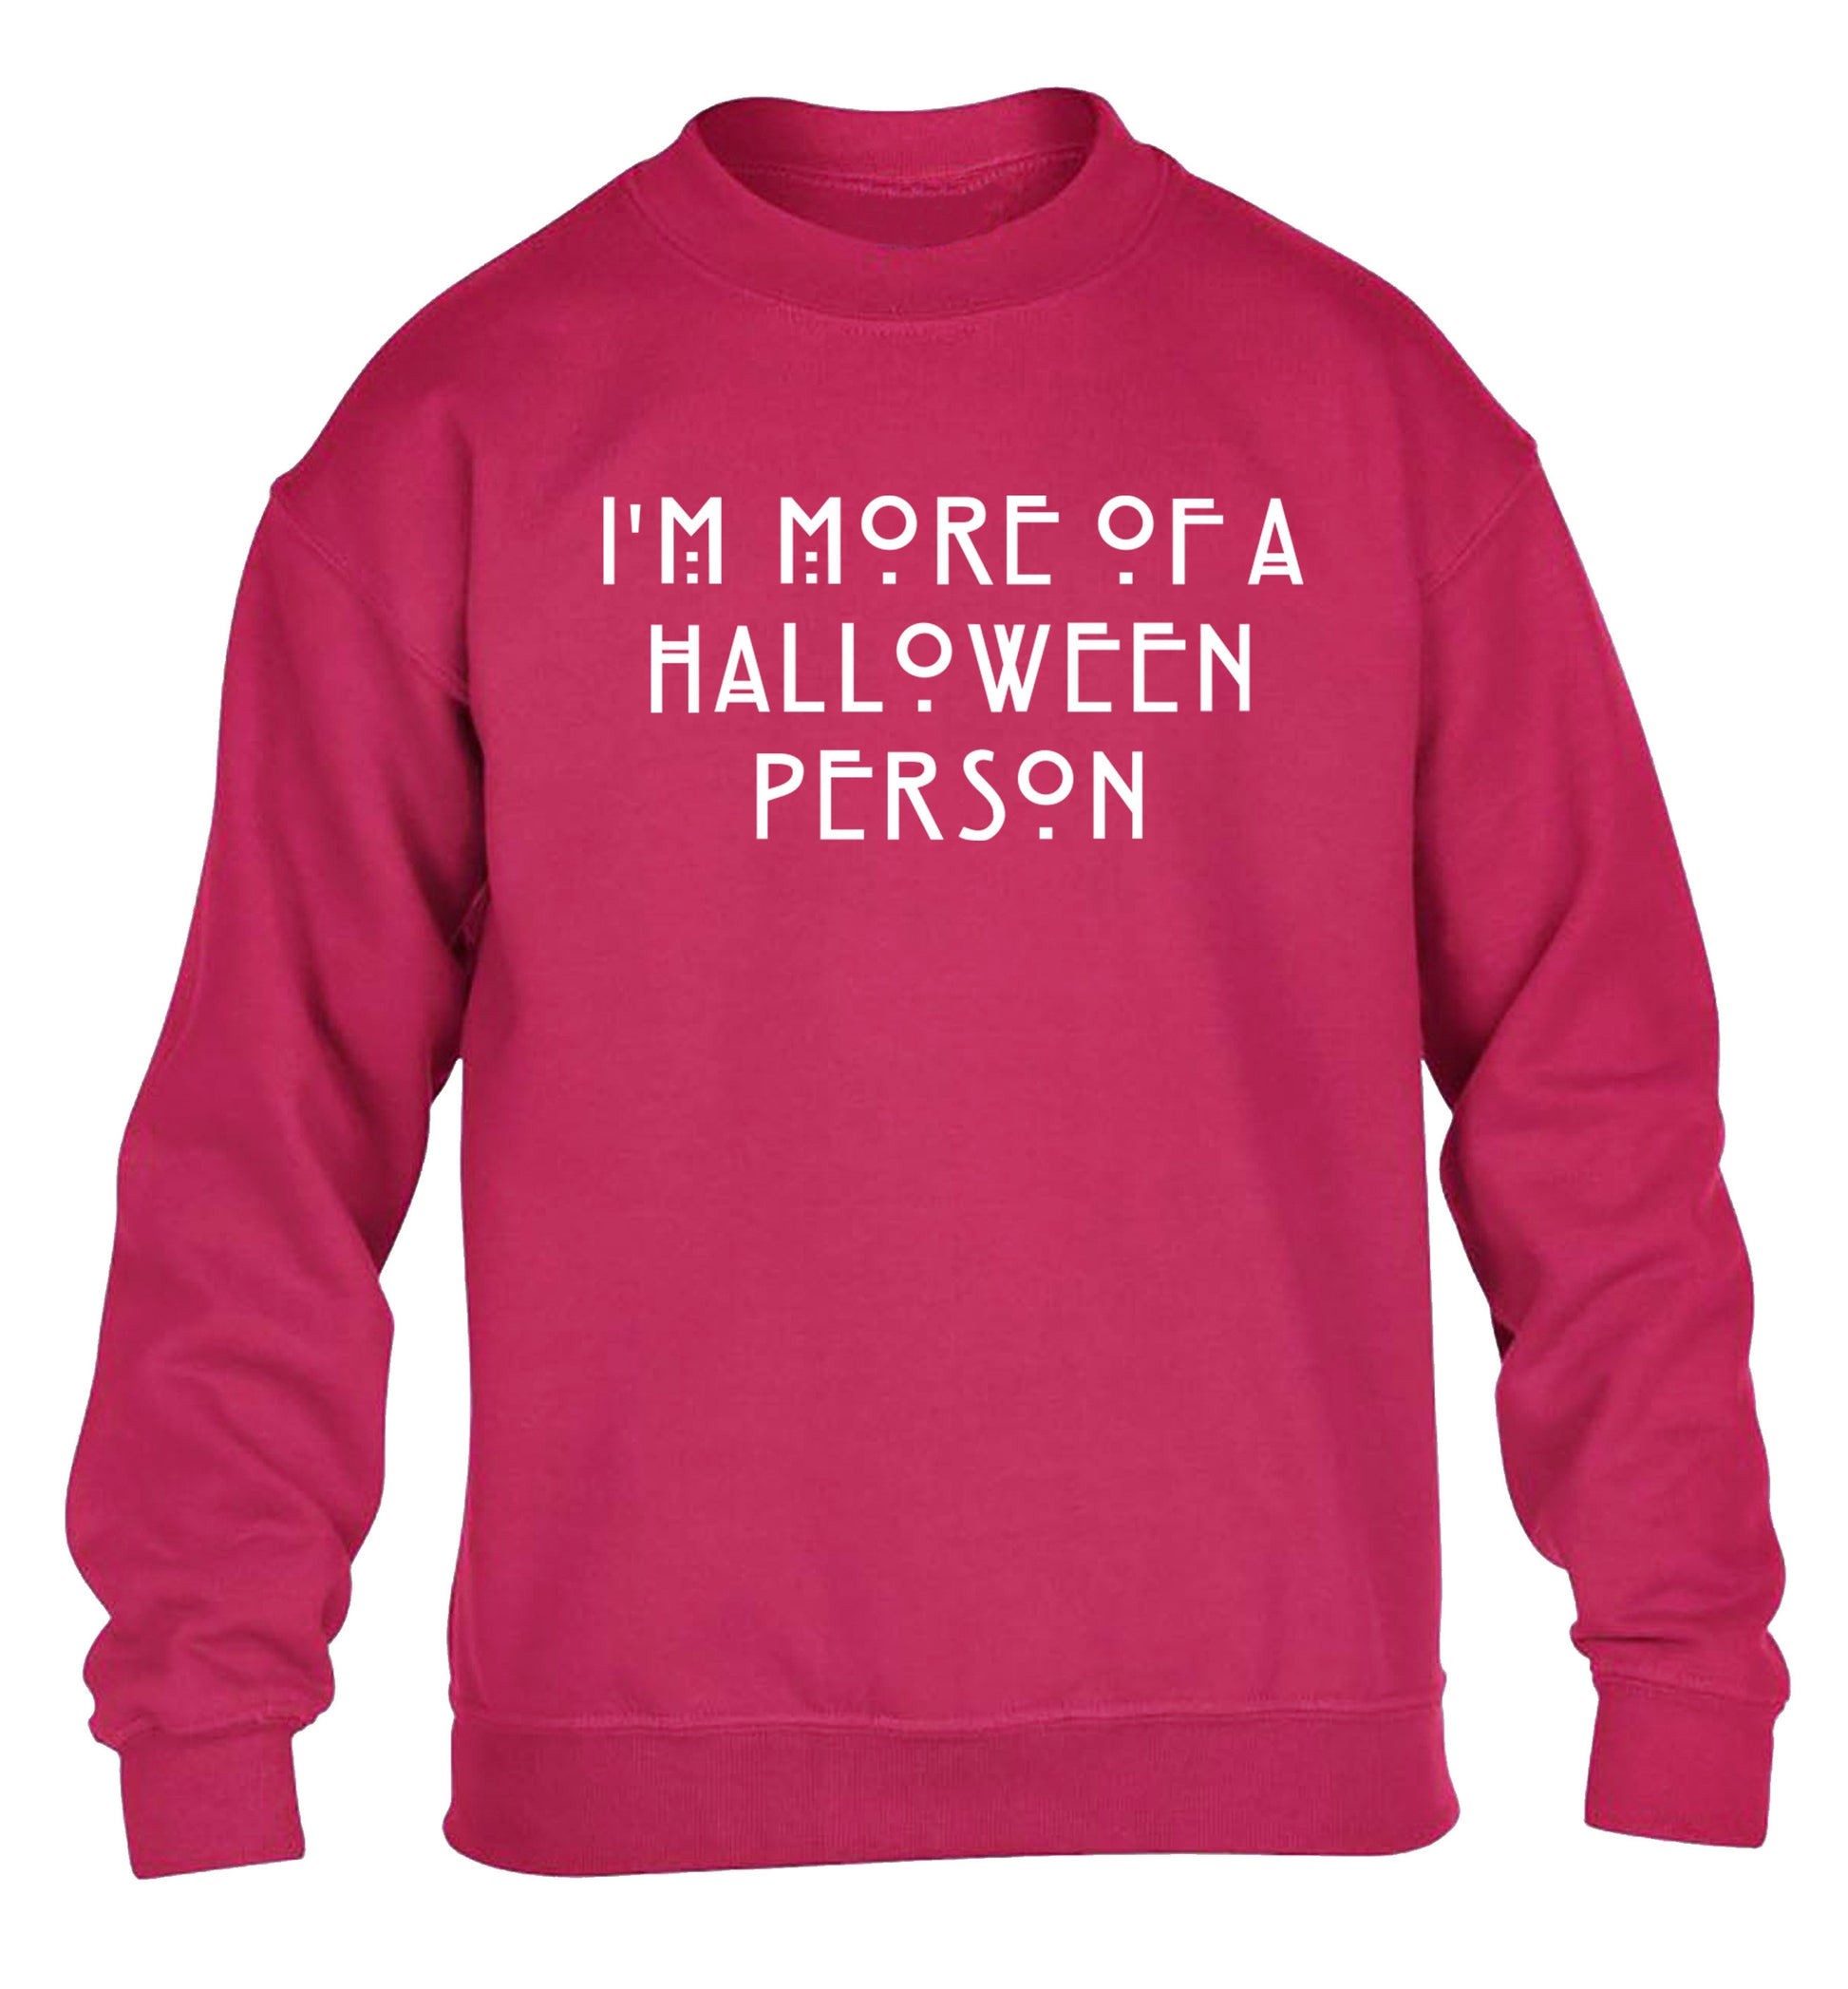 I'm more of a halloween person children's pink sweater 12-14 Years